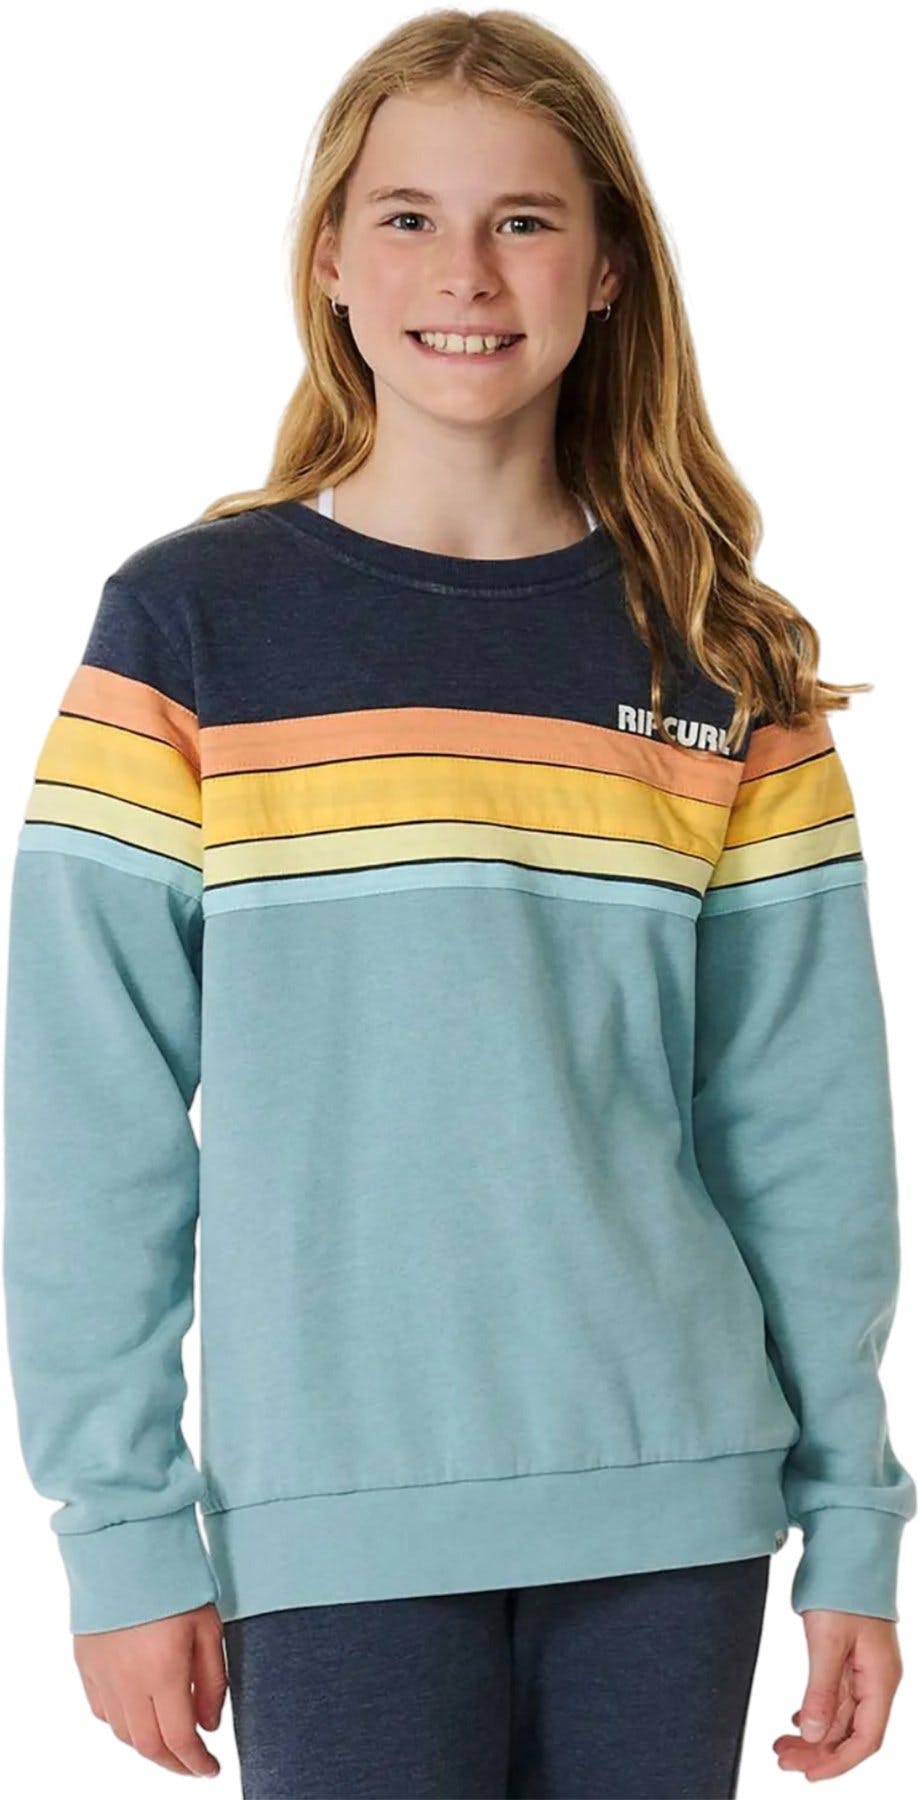 Product image for Surf Revival Crew Neck Sweatshirt - Girls